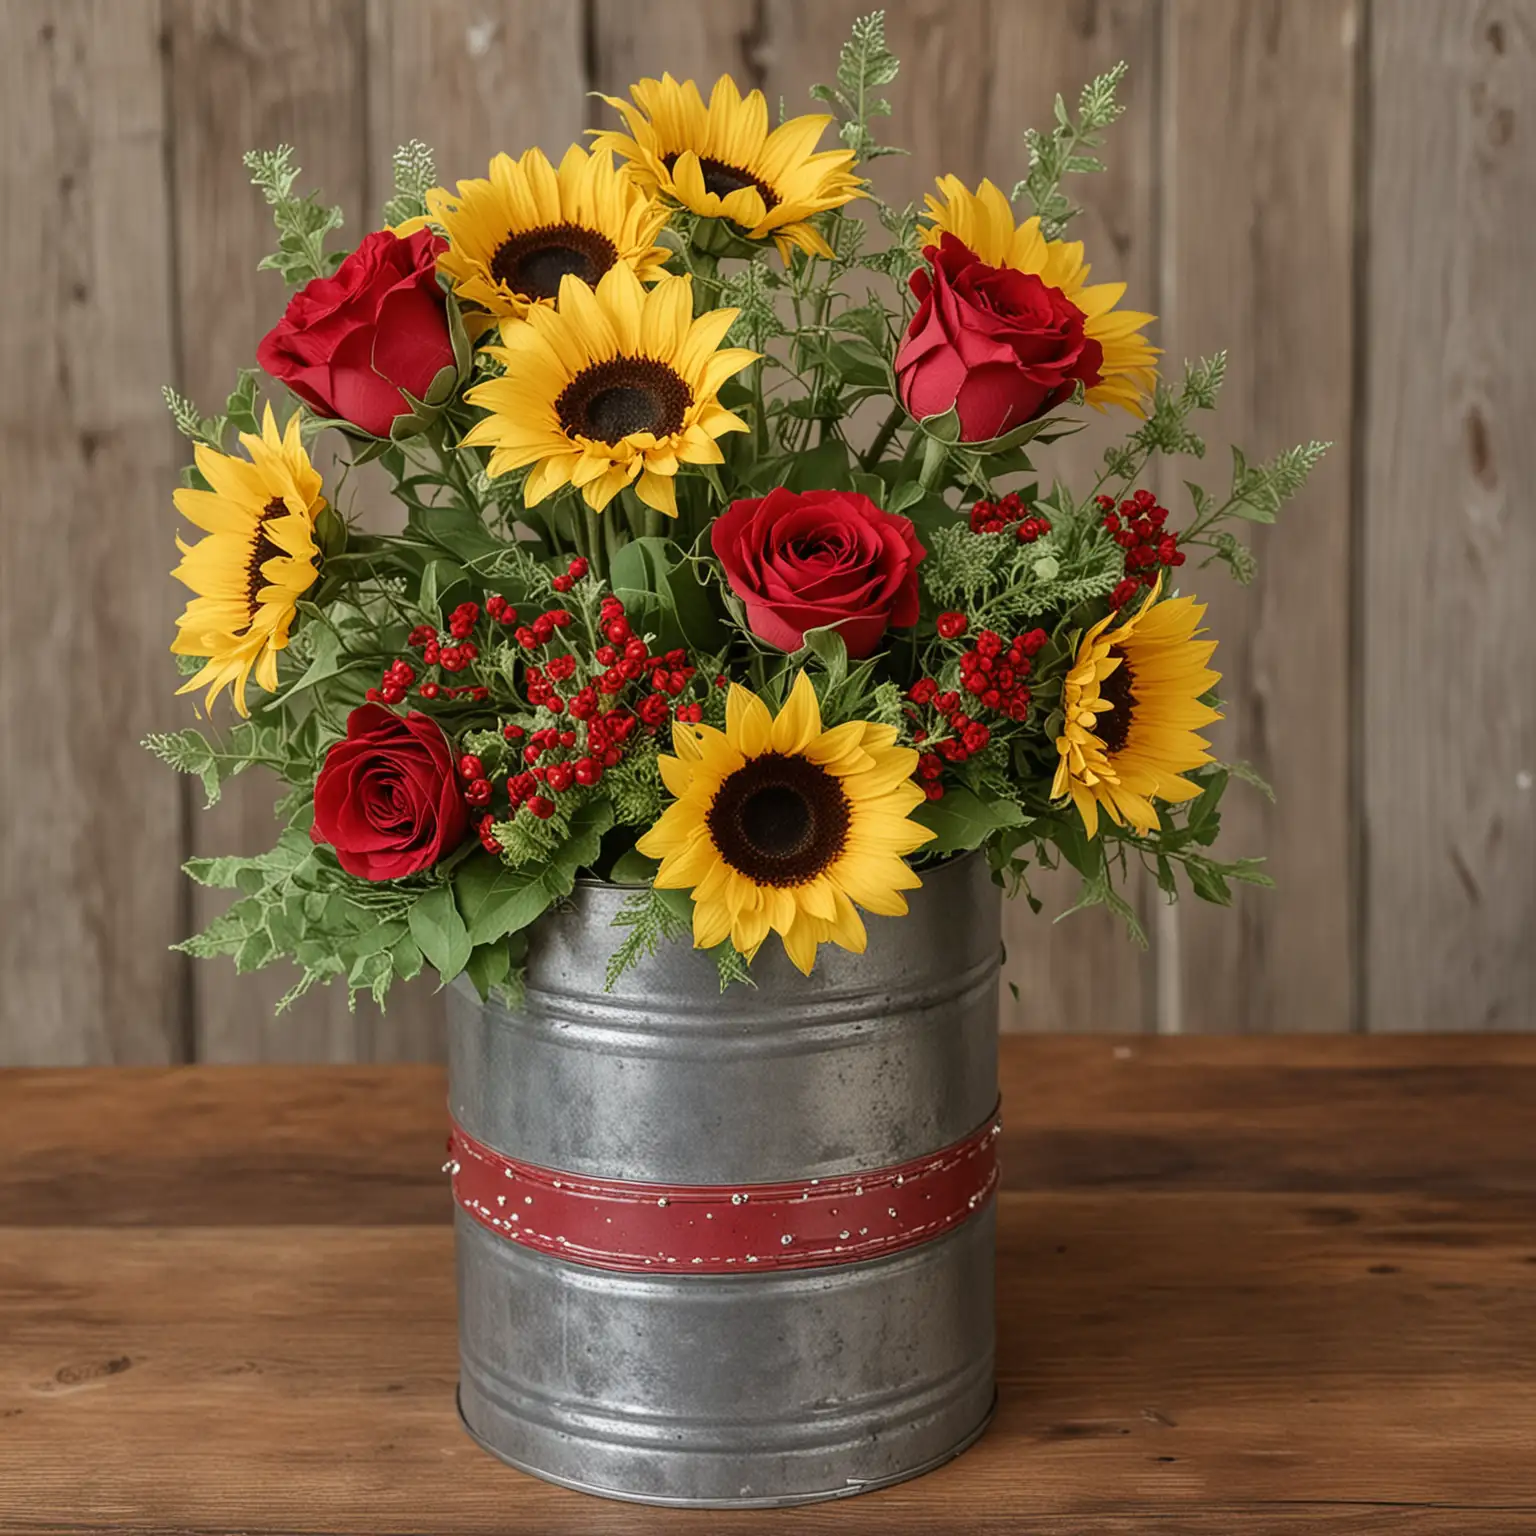 Rustic-Sunflower-and-Red-Rose-Centerpiece-in-Tin-Can-Vase